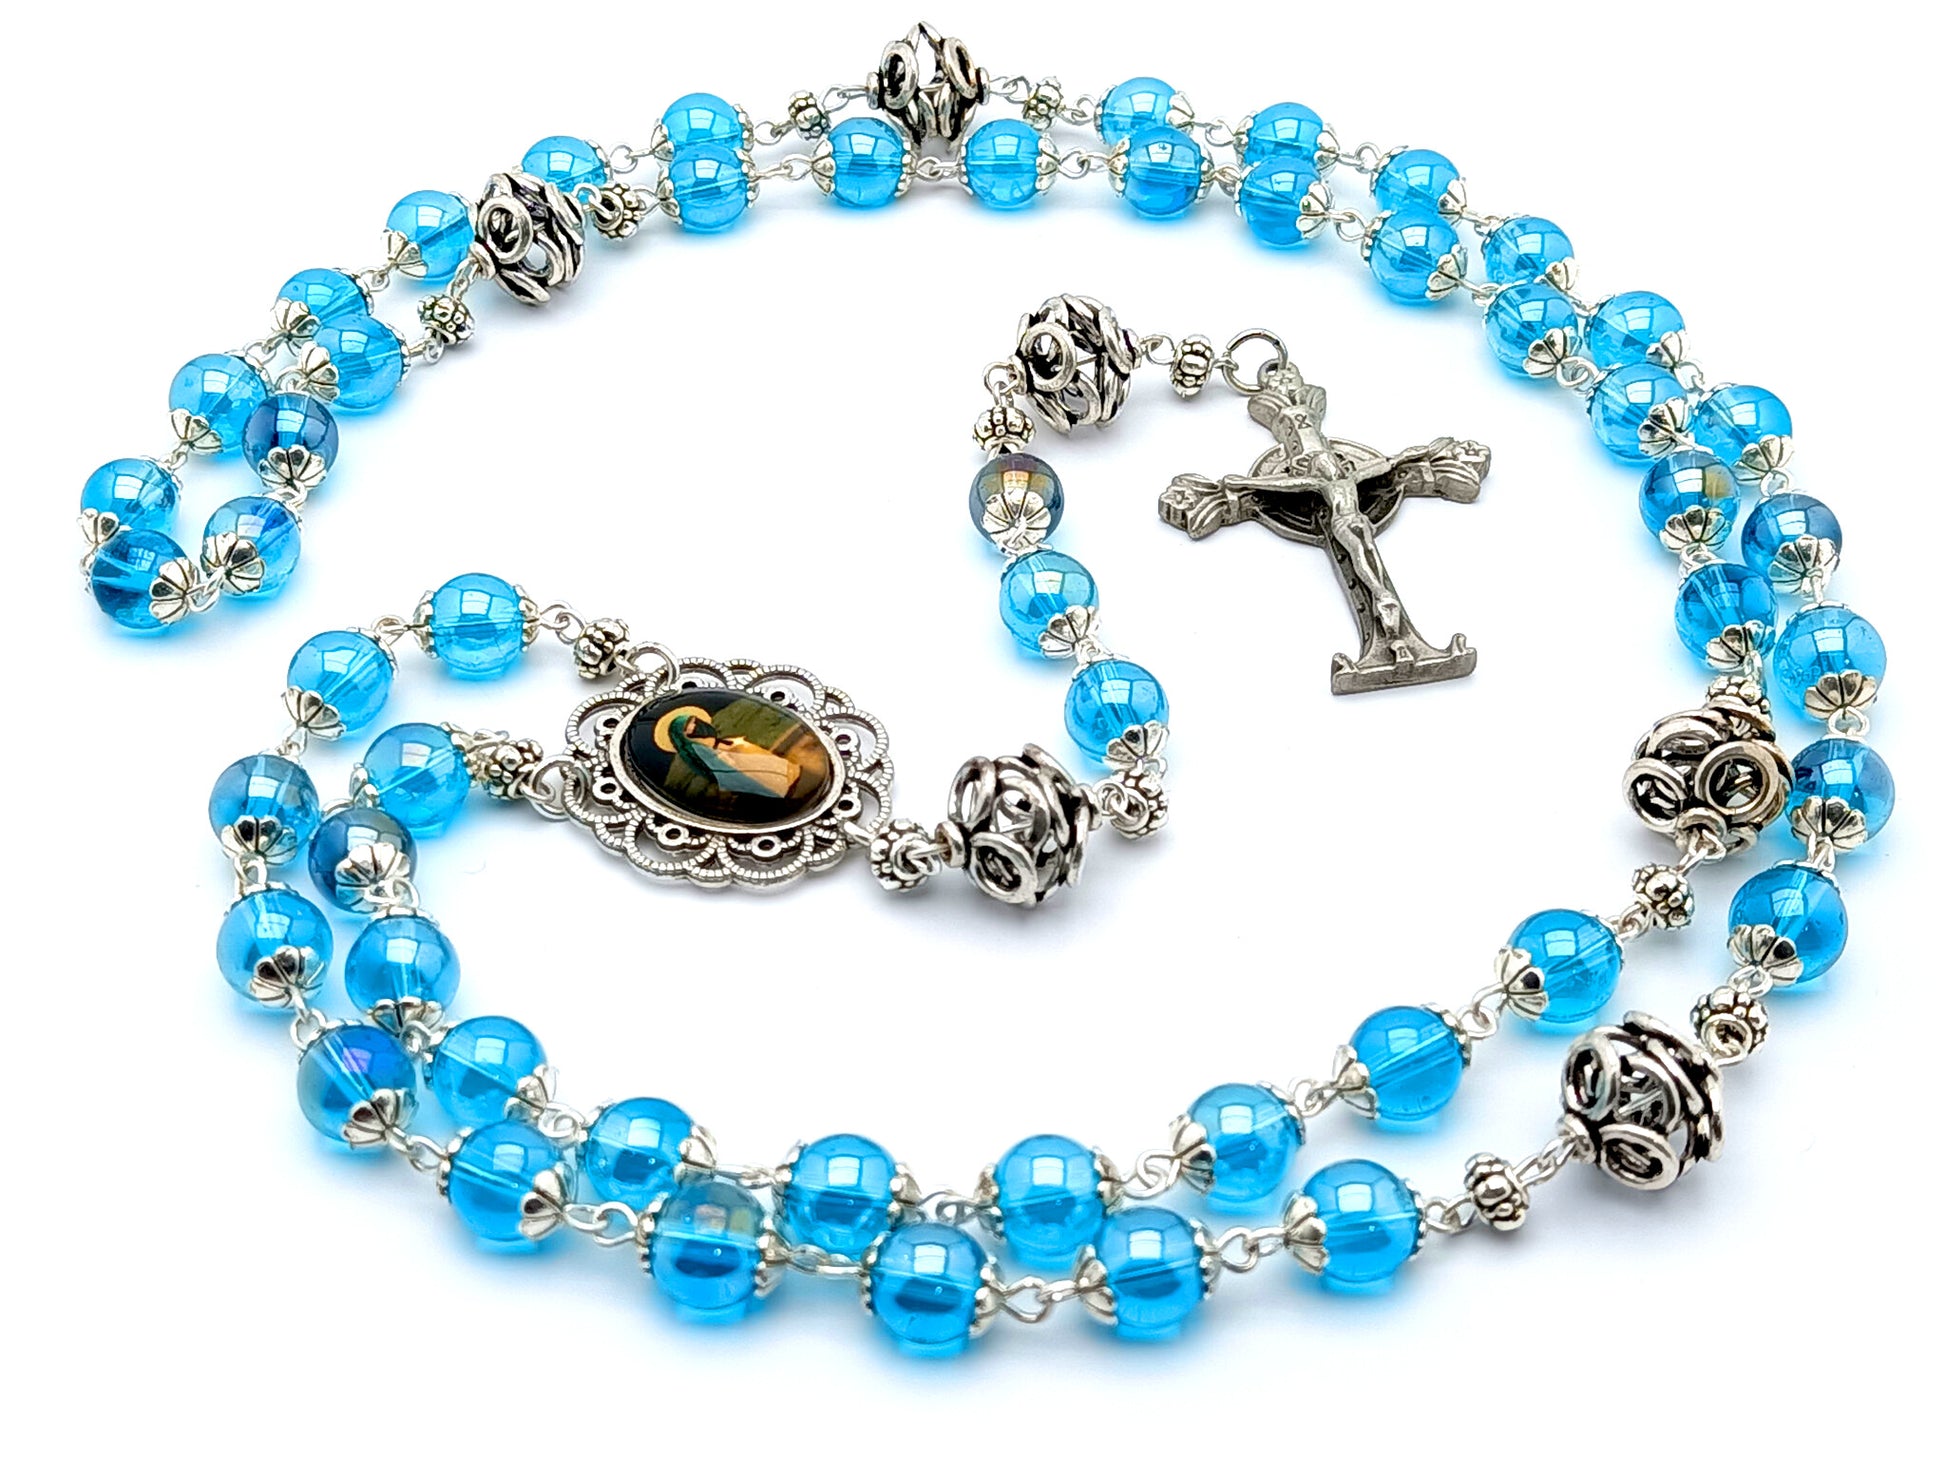 Our Lady of Guadalupe unique rosary beads with blue glass and silver beads, pewter crucifix and silver picture centre medal.